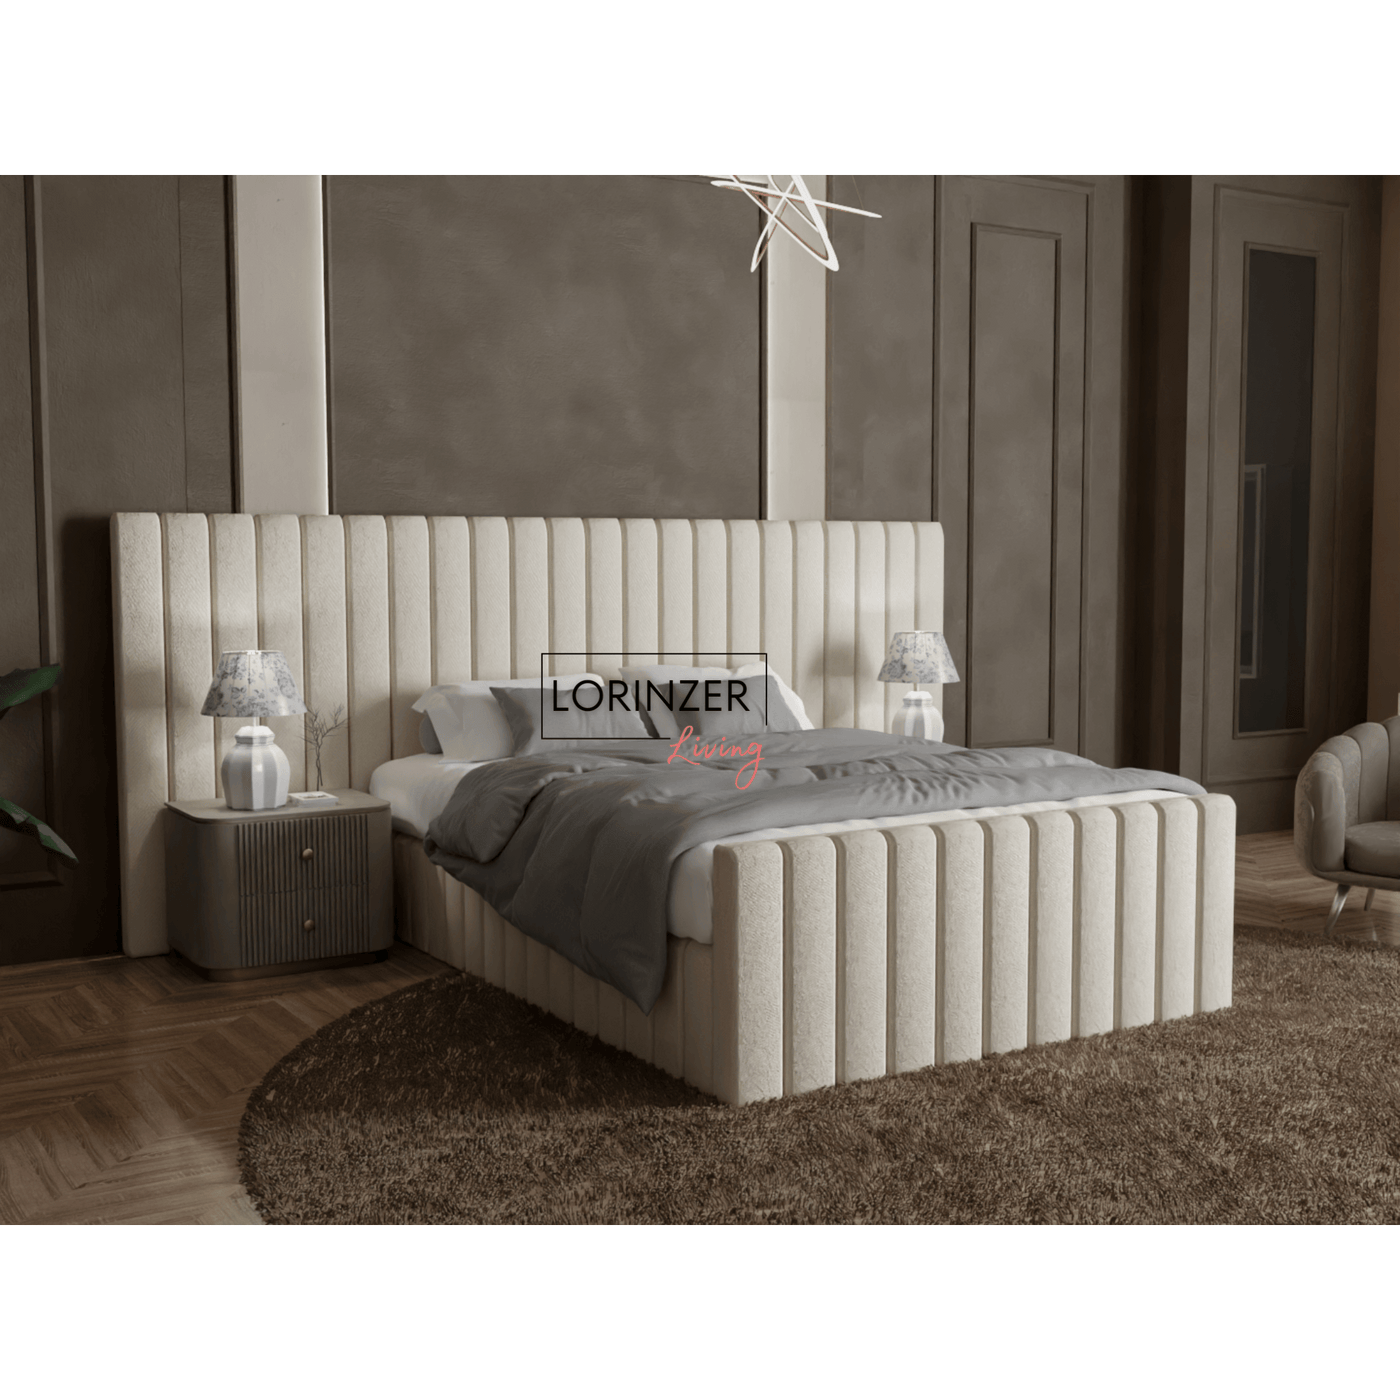 Winged bed  Upholstered Tall headboard Bed, stylish bed, Storage Bed, King size bed, Fabric Bed, Extended Headboard Bed, Cream Bed